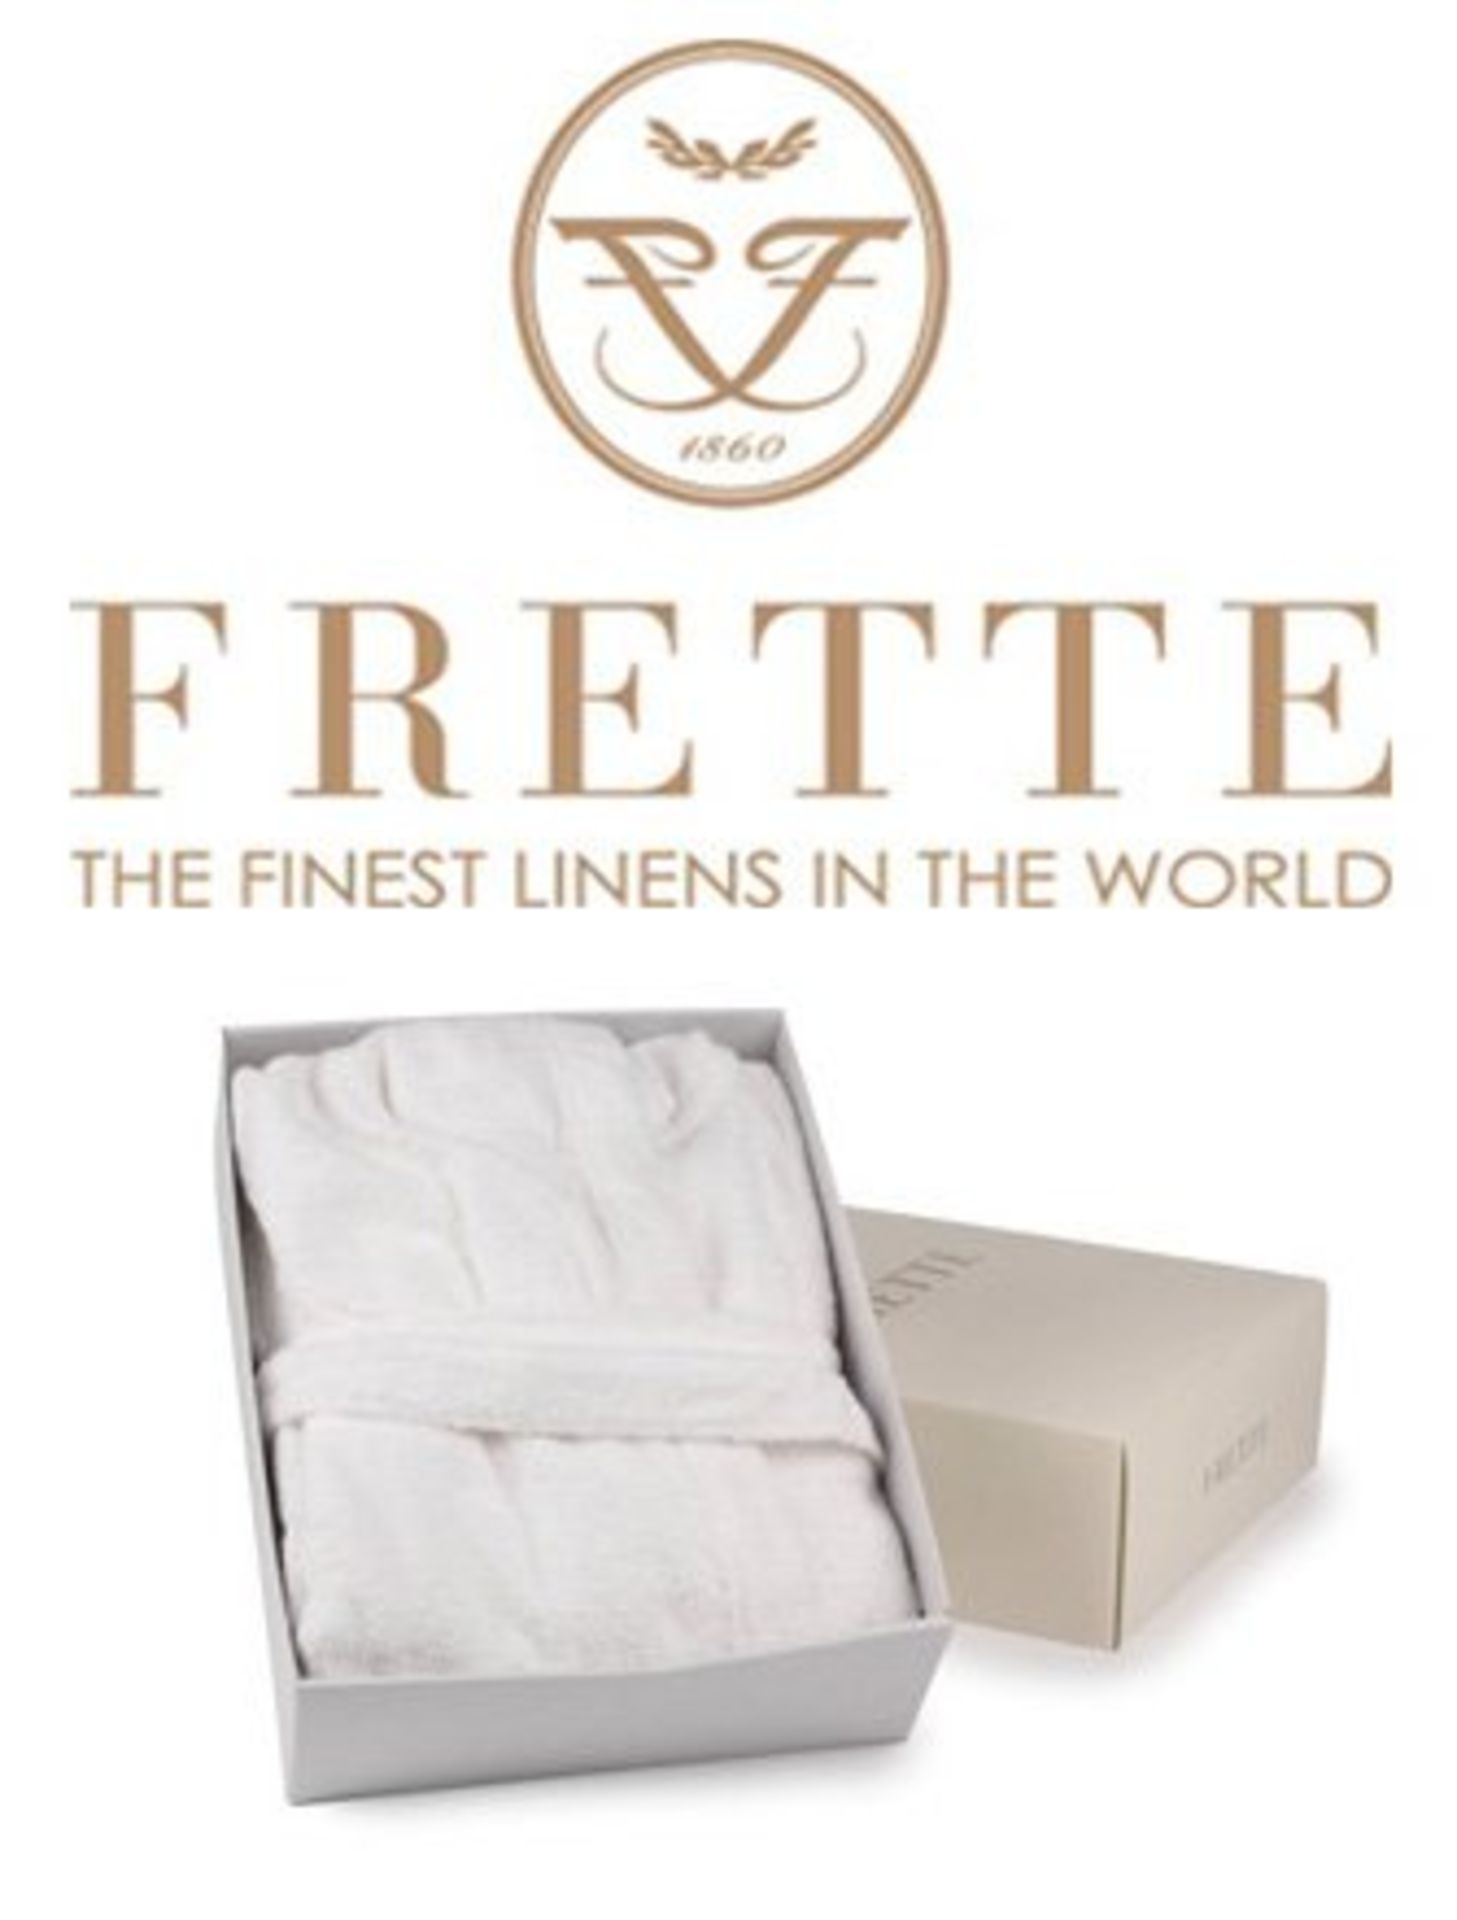 V *TRADE QTY* Brand New Frette Luxury Italian 100% Open Ended High Quality Cotton White Bath Robe - Image 2 of 2